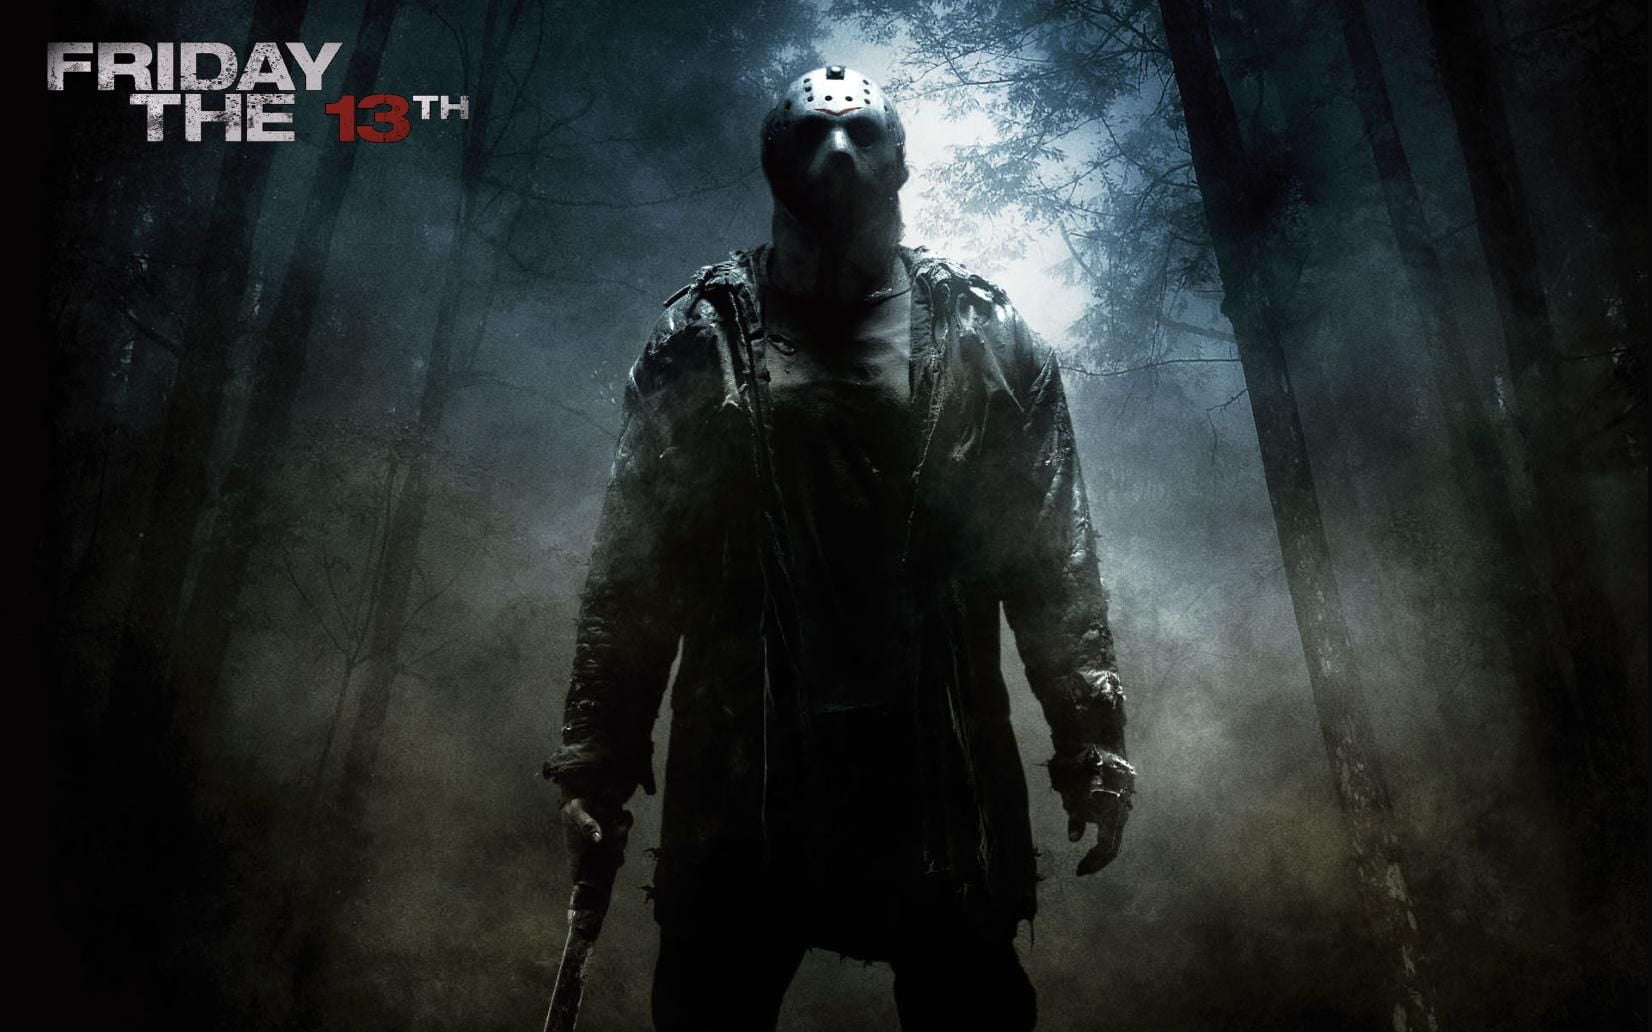 Friday The 13th, Friday The 13th movie poster, Movies, Hollywood Movies